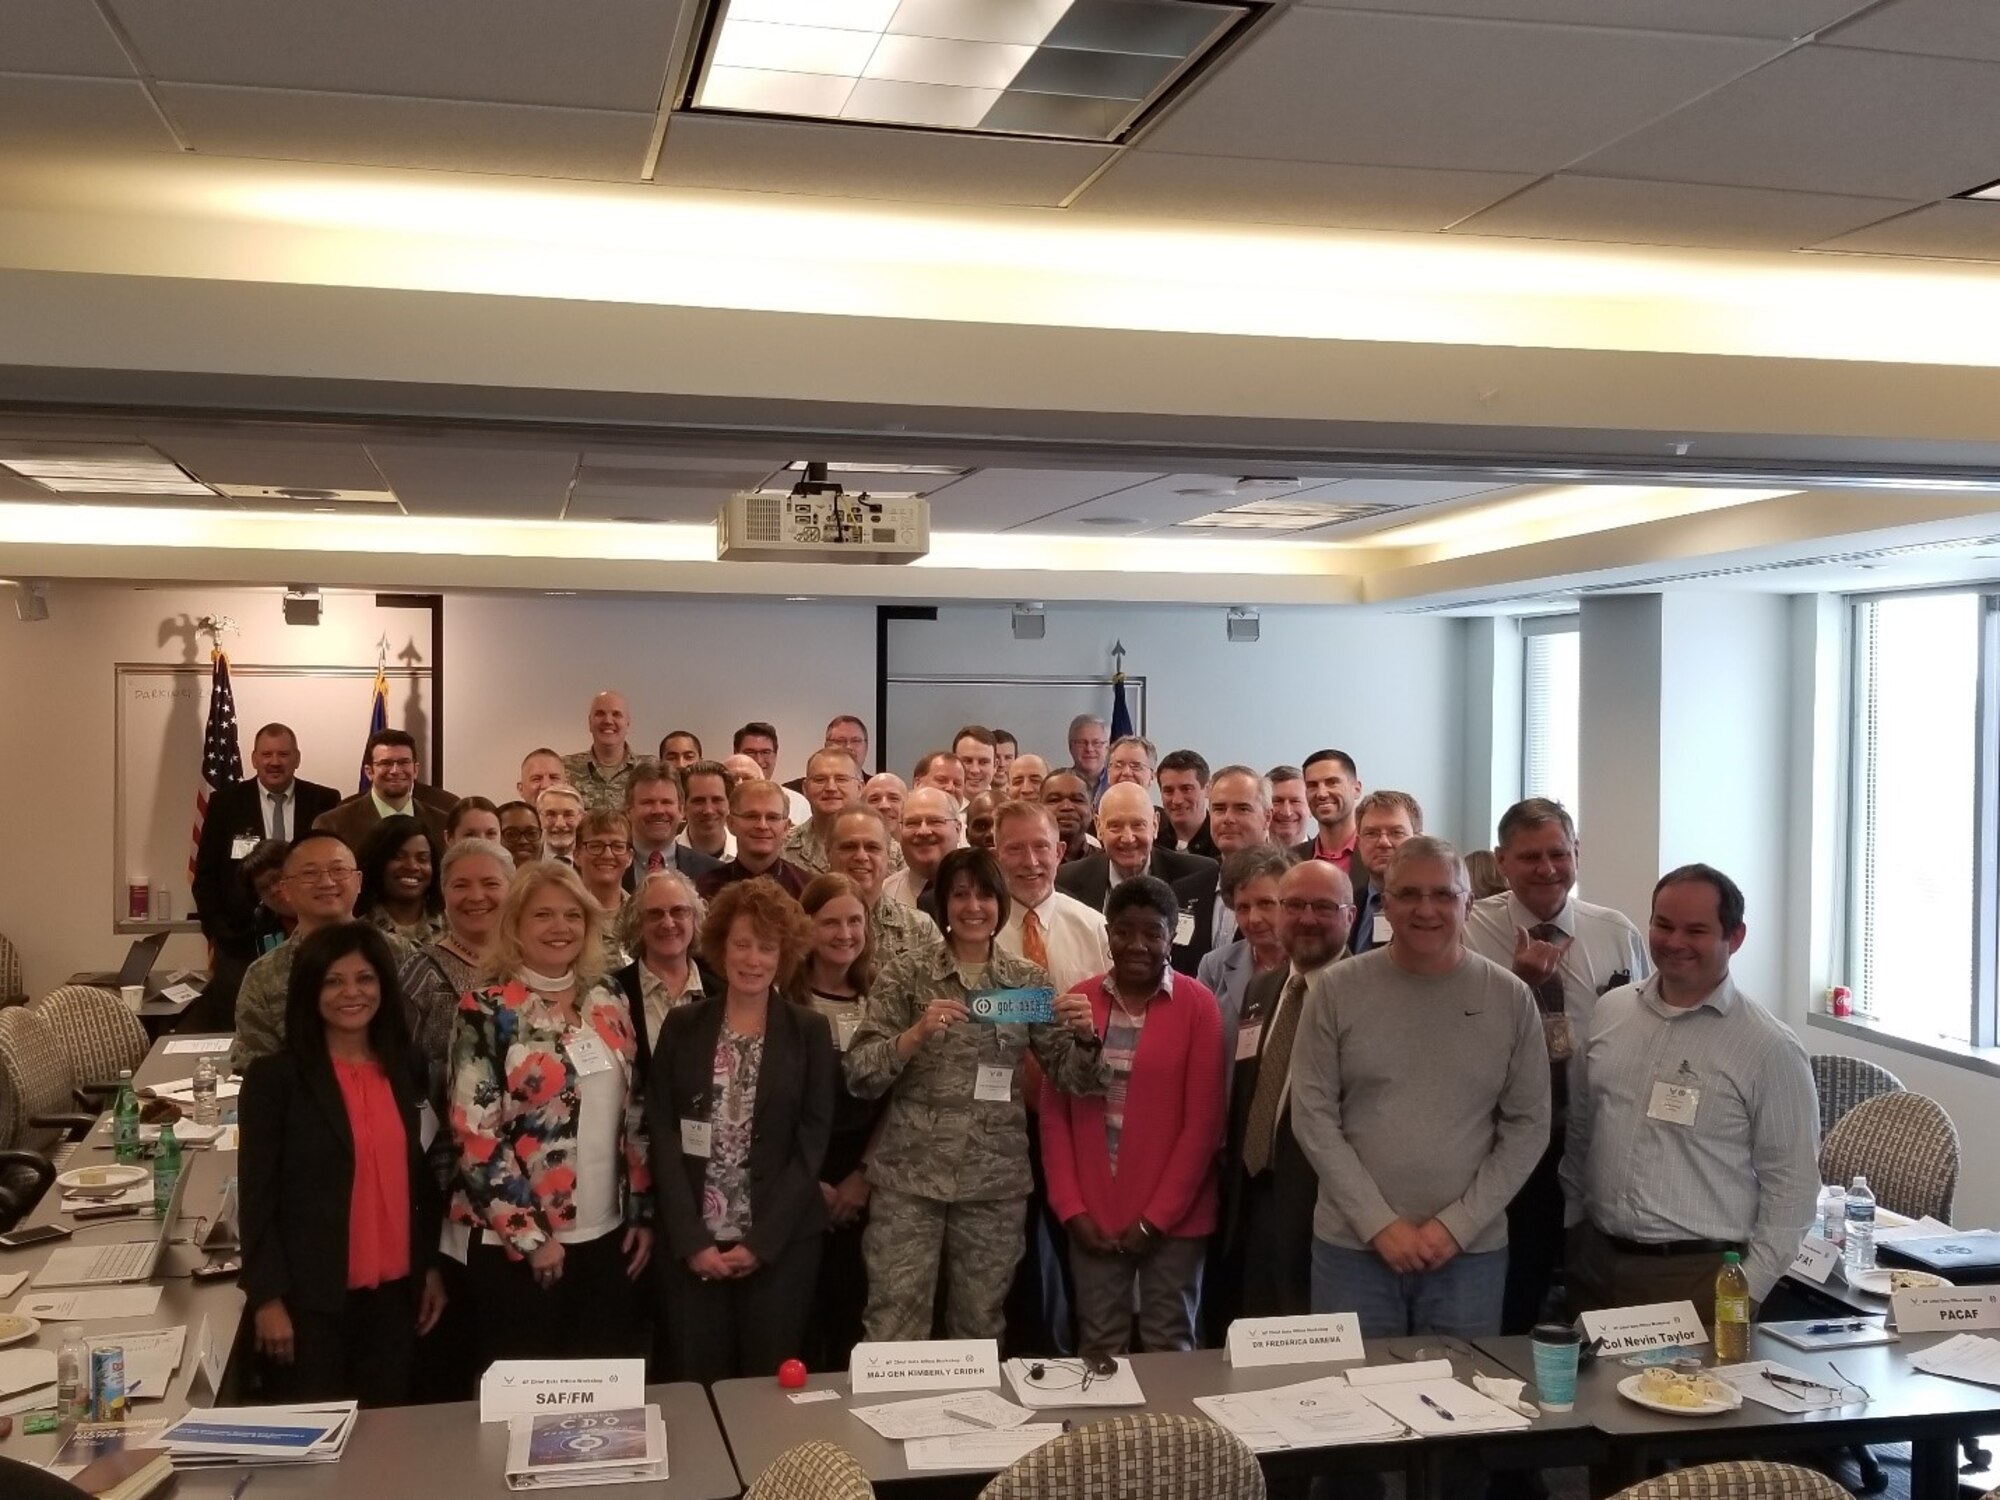 More than 70 representatives from major commands and functional communities across the Air Force gathered in Arlington, Virginia, April 11-13, 2018, to collaborate on the way forward for defining an enterprise-wide, scalable capability that makes data Visible, Accessible, Understandable, Linked, and Trustworthy